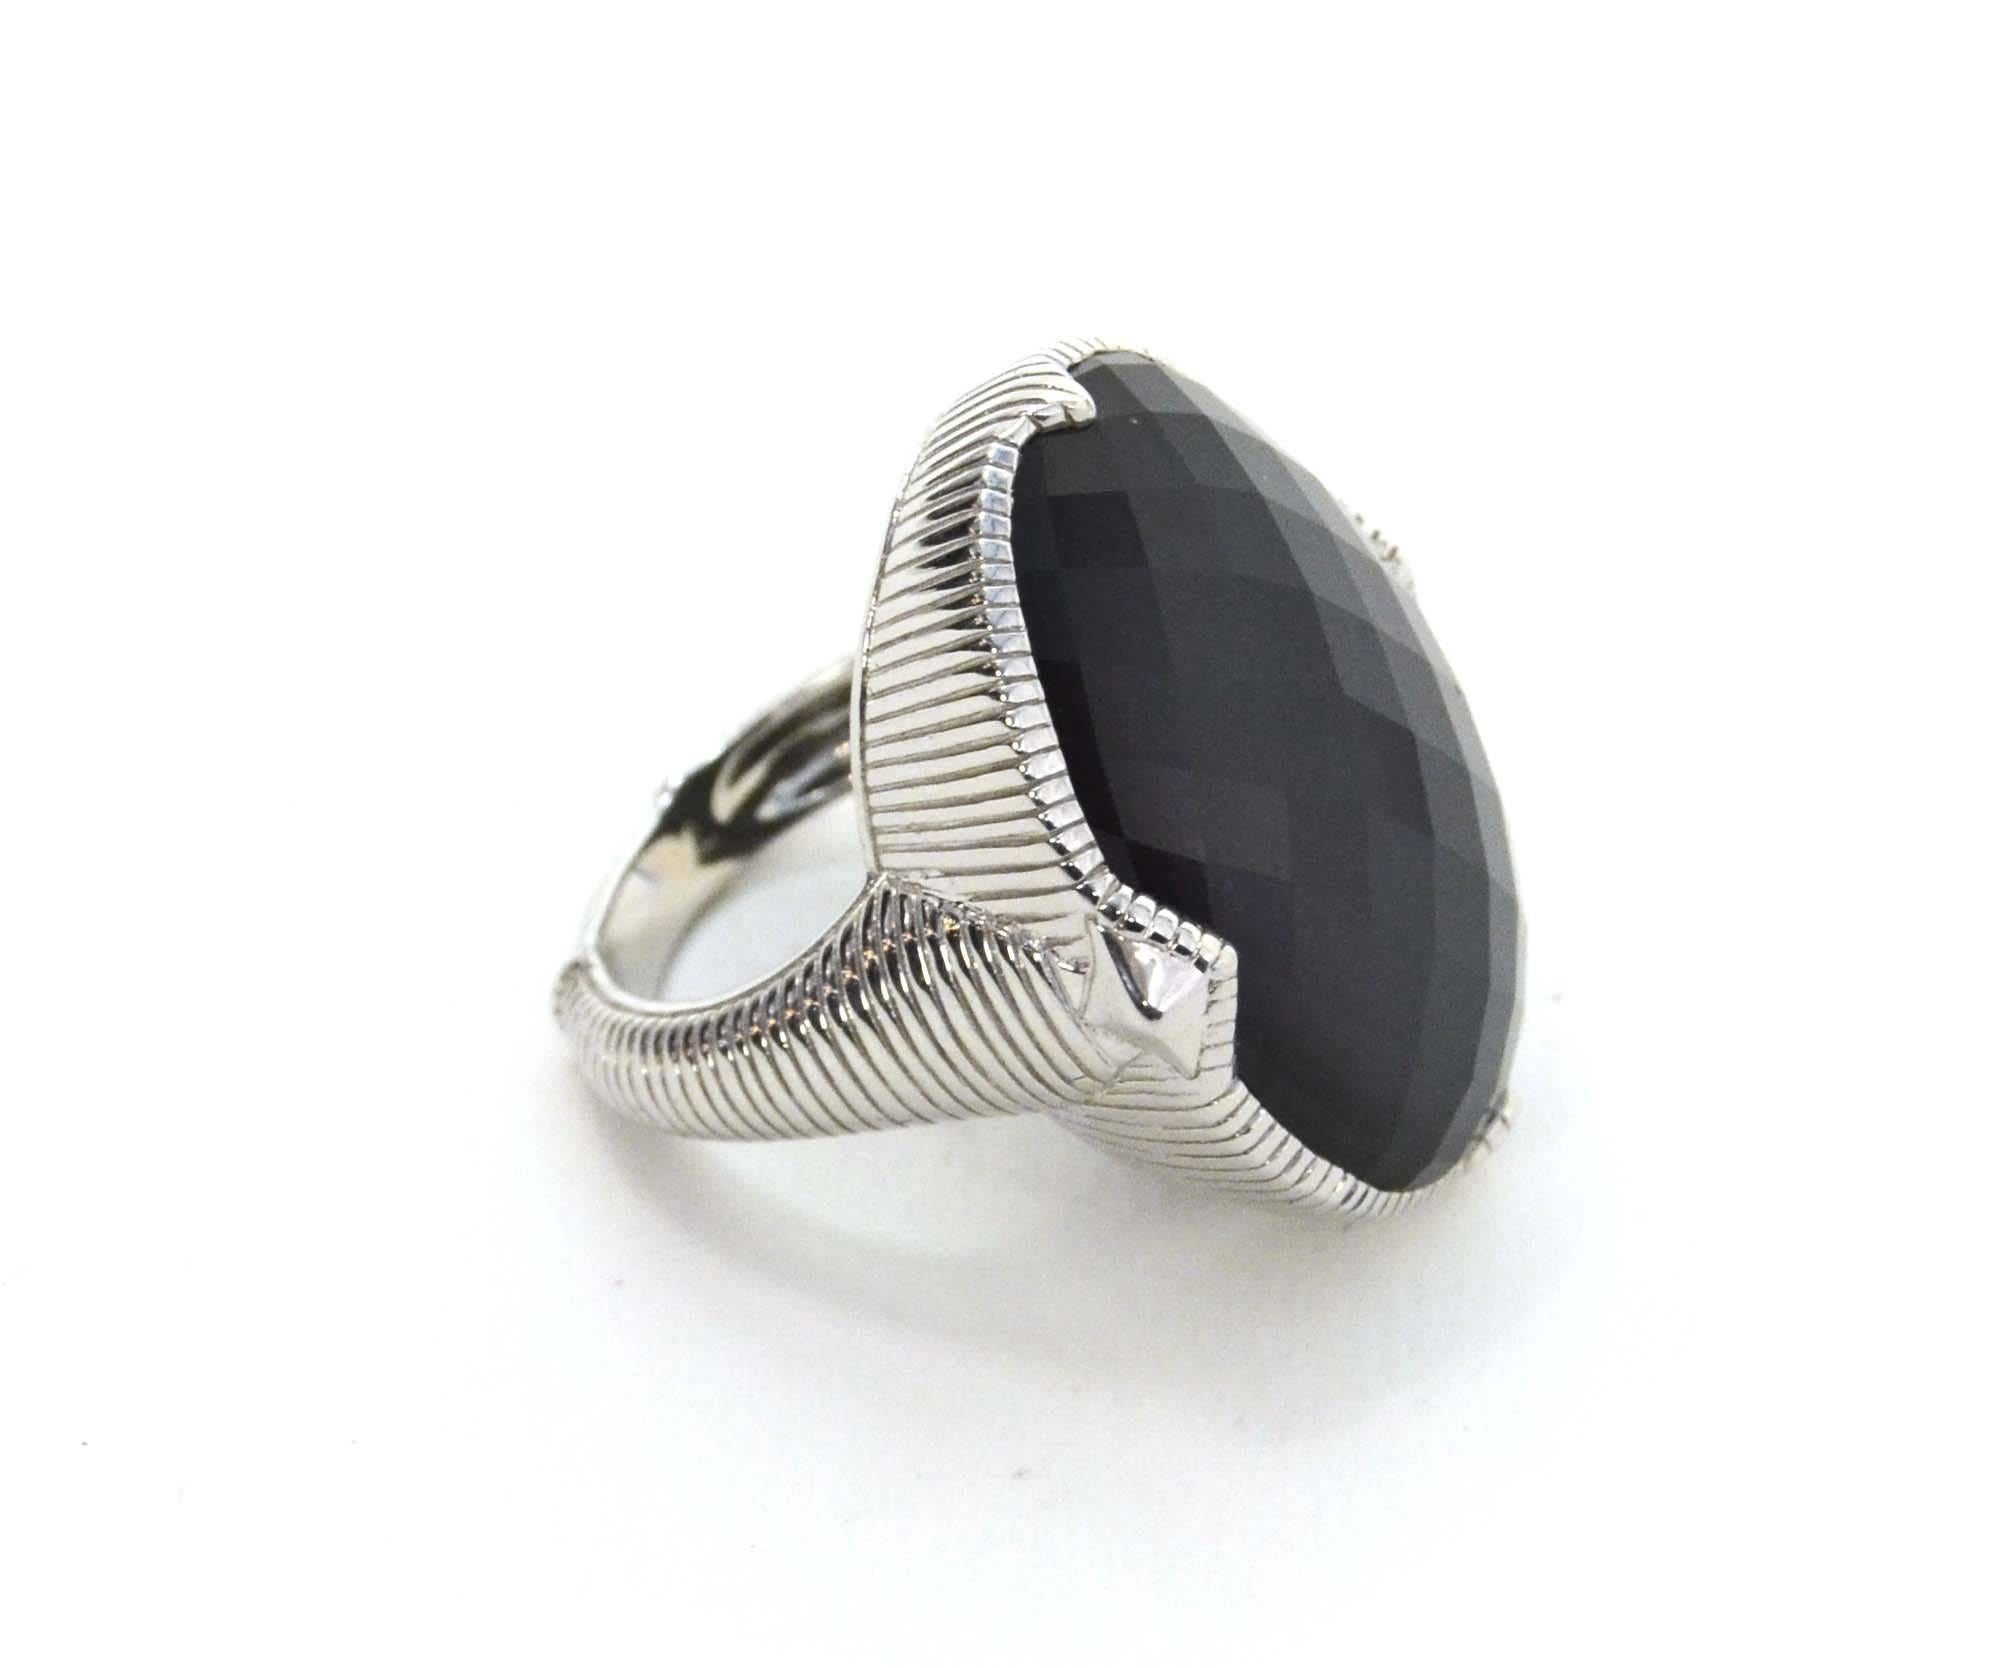 Judith Ripka Sterling Hematite Doublet Oval Ring 
Color: Silver and silver-grey
Materials: Hematite and sterling silver
Closure: None
Stamp: JR 925
Retail Price: $600 + tax
Overall Condition: Excellent 
Includes: Pouch
Size: 7
Stone: 1